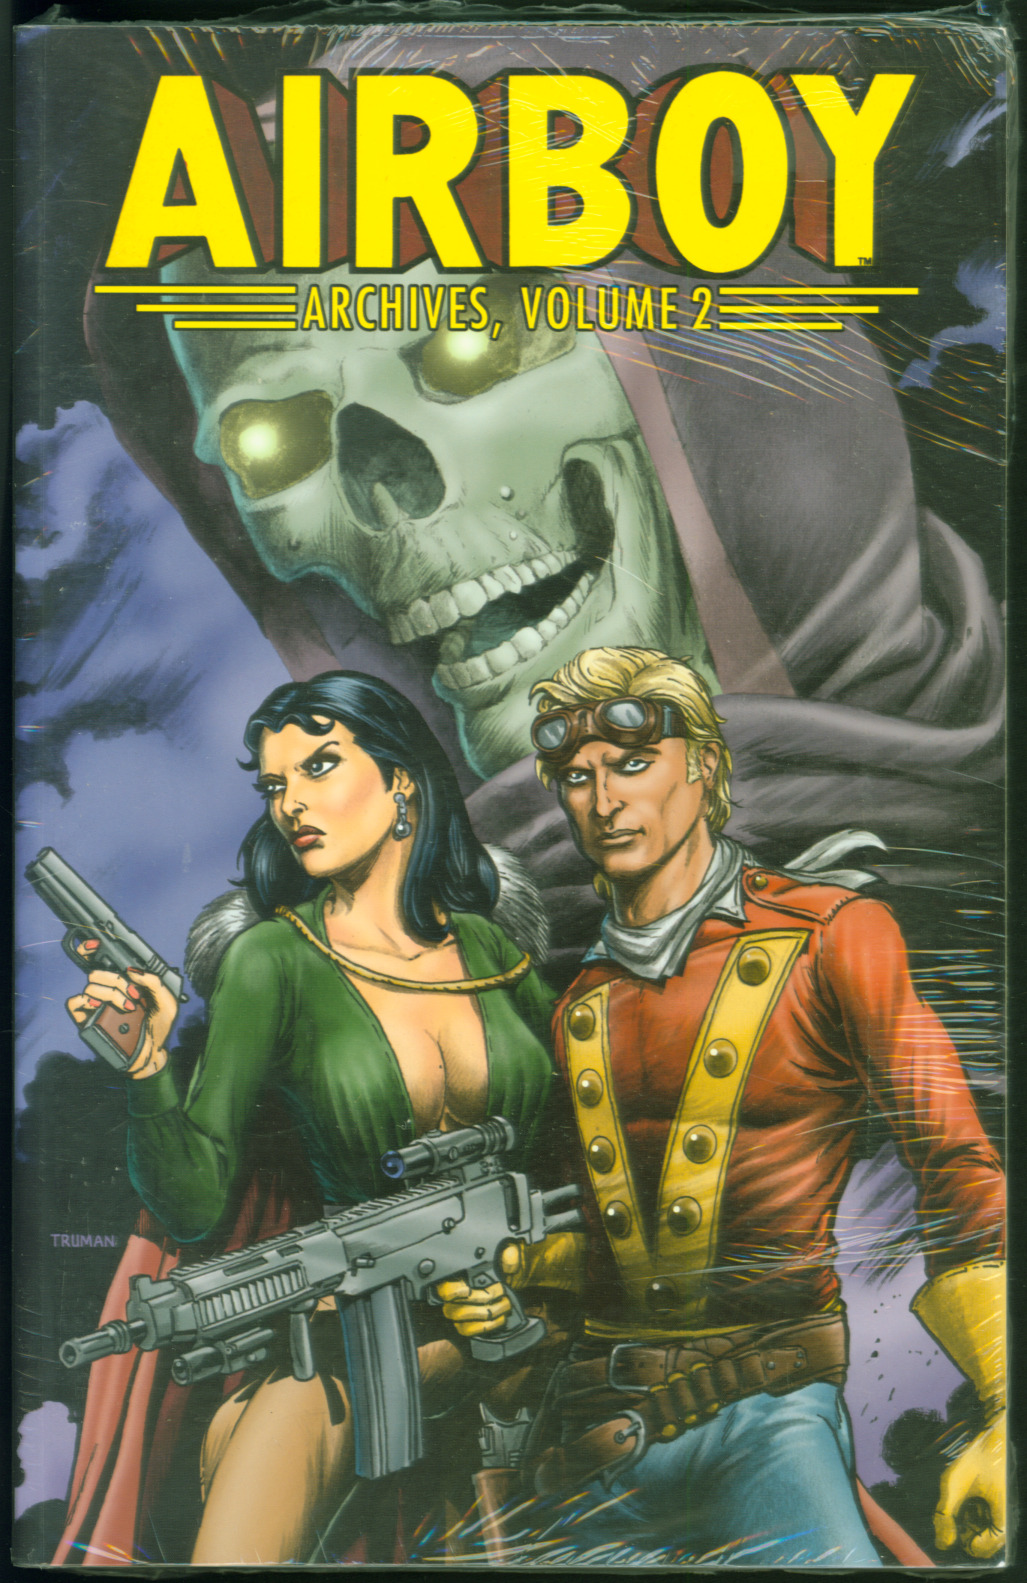 AIRBOY ARCHIVES VOLUME 2 By Chuck Dixon  New  Still in Factory Shrinkwrap